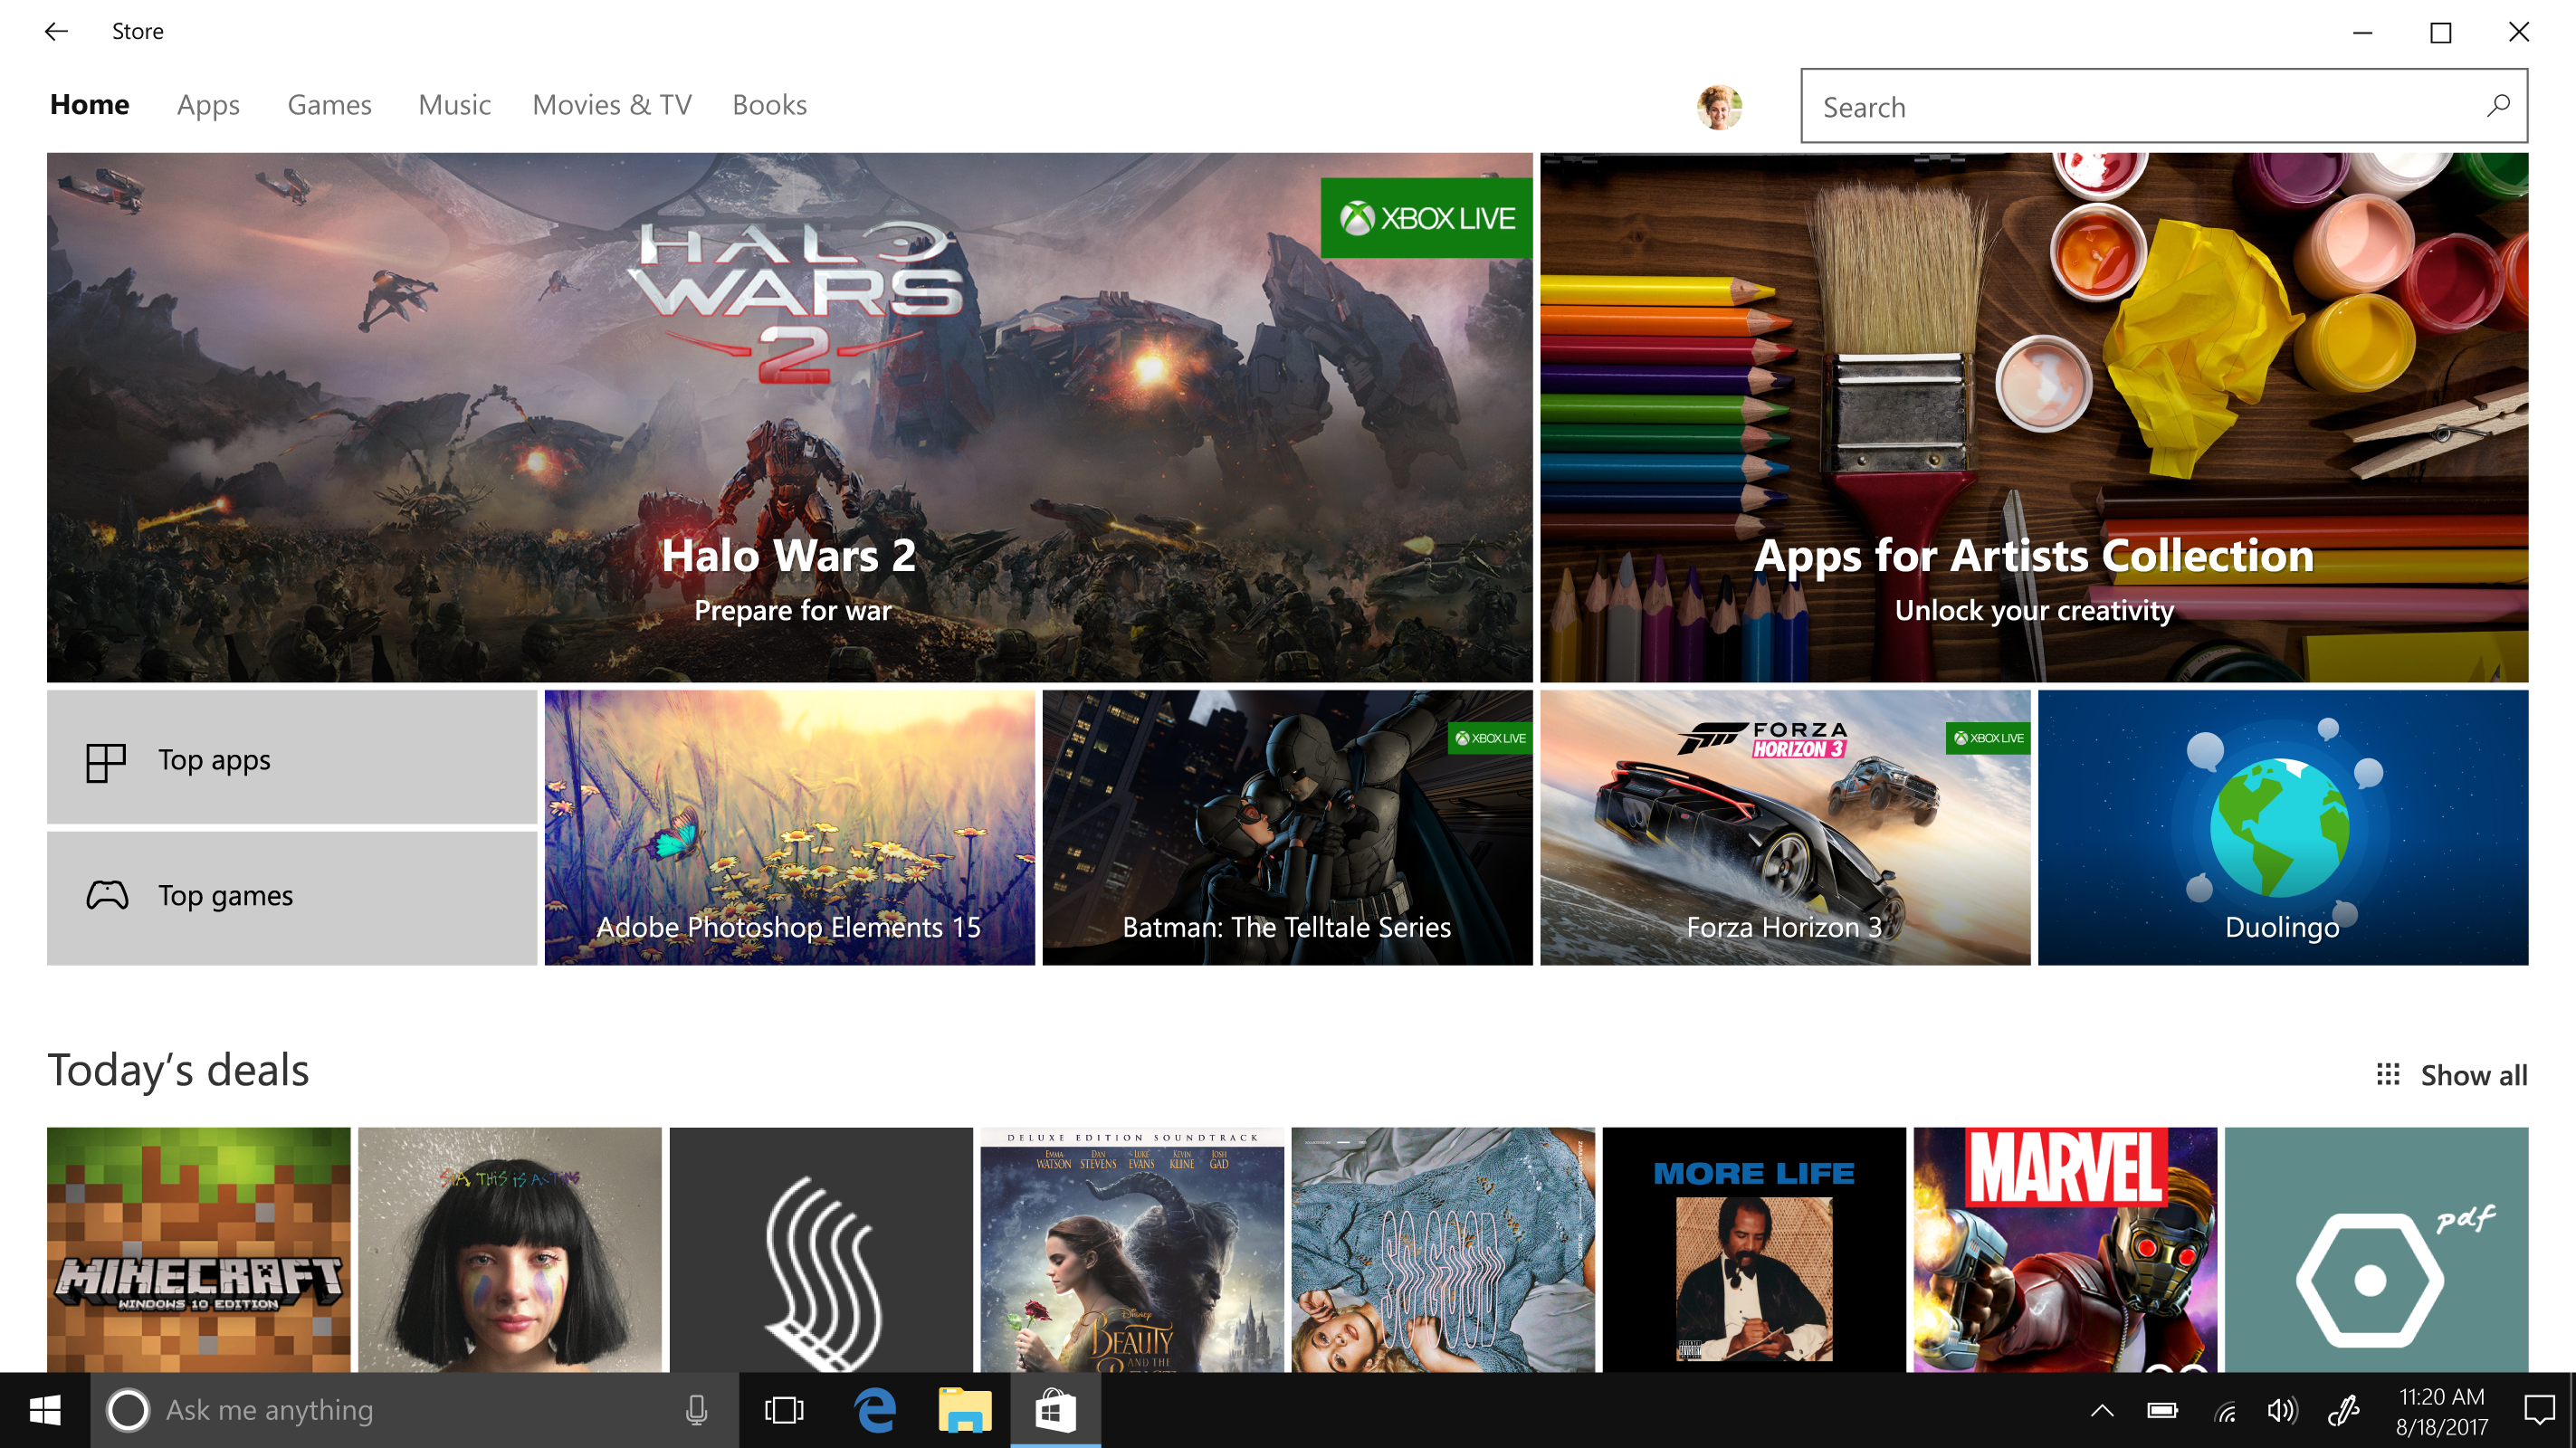 Homepage of the Windows Store shown on Windows 10 S